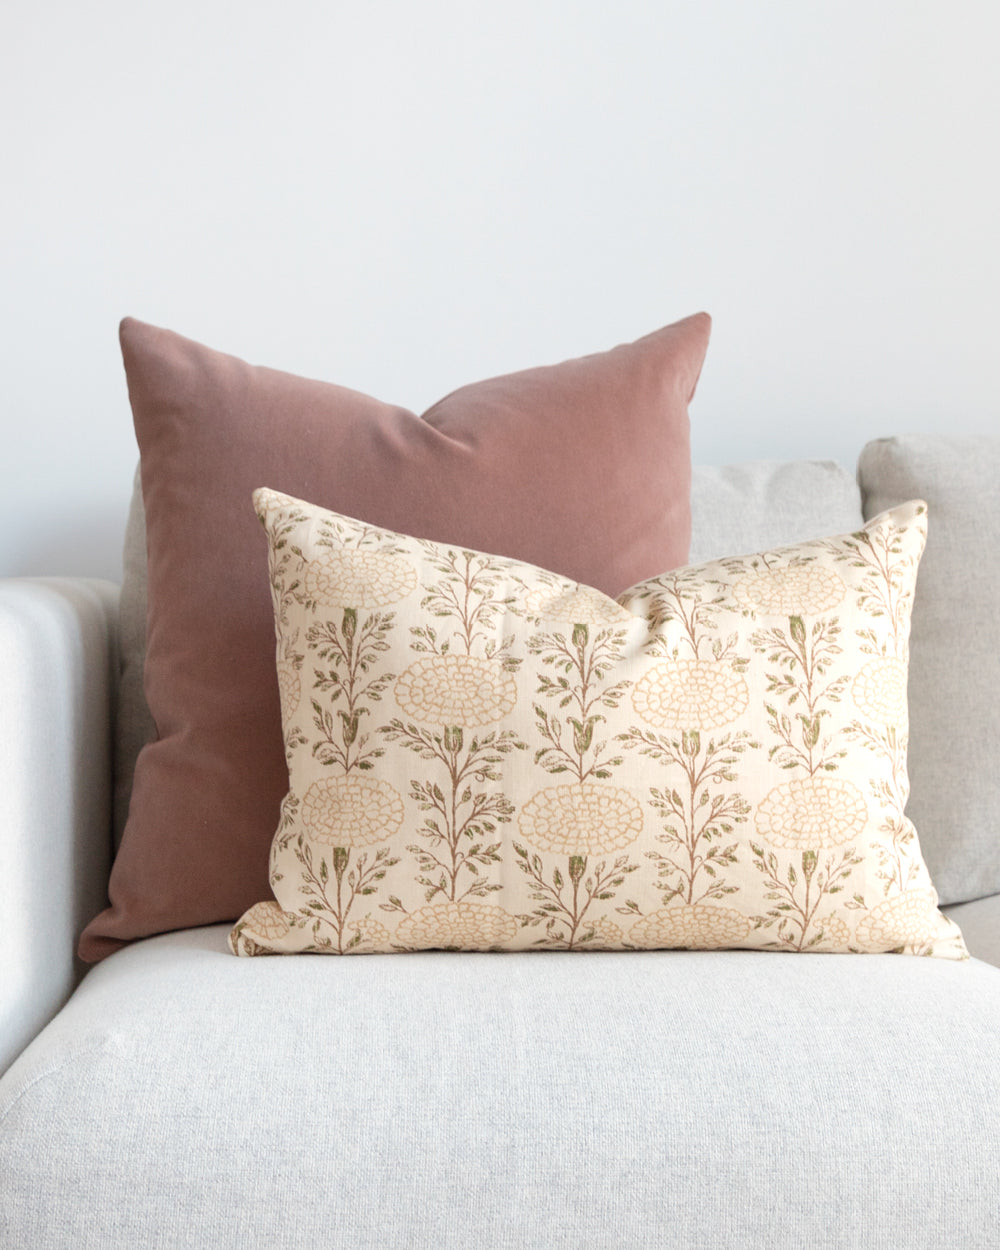 Rose velvet pillow on white sofa with beige floral complimentary pillow.